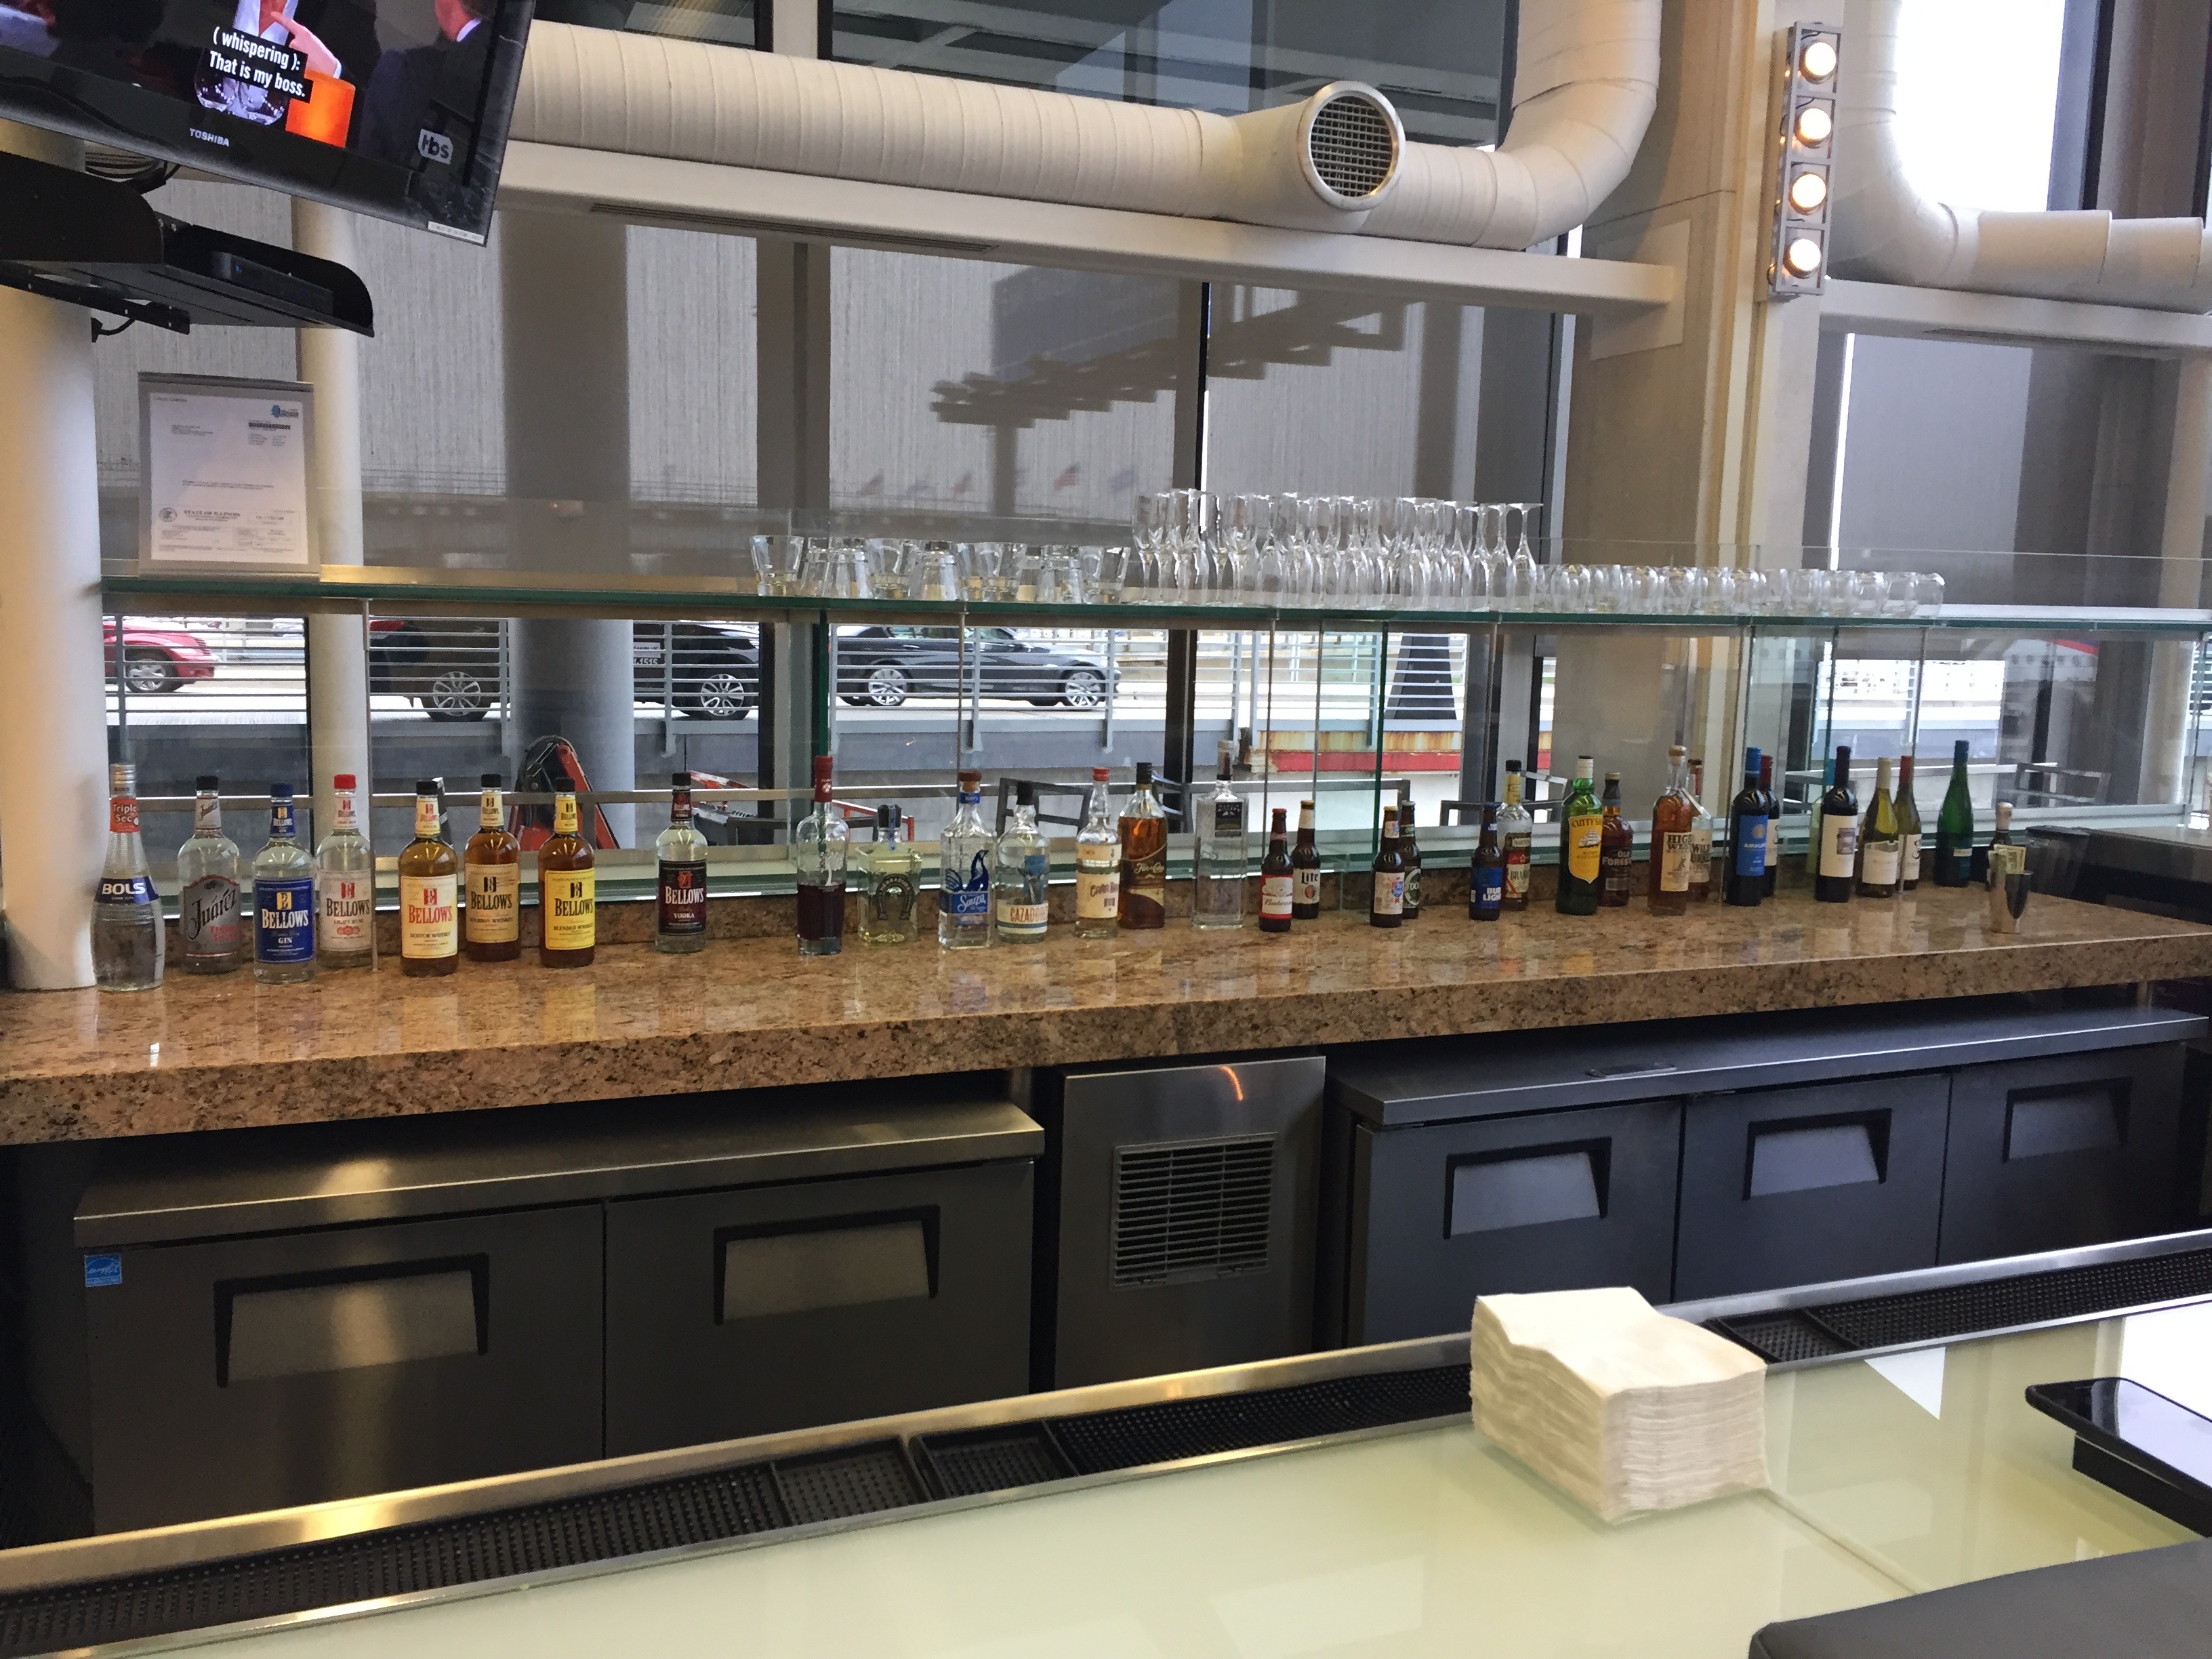 American Airlines Admirals Club Chicago L